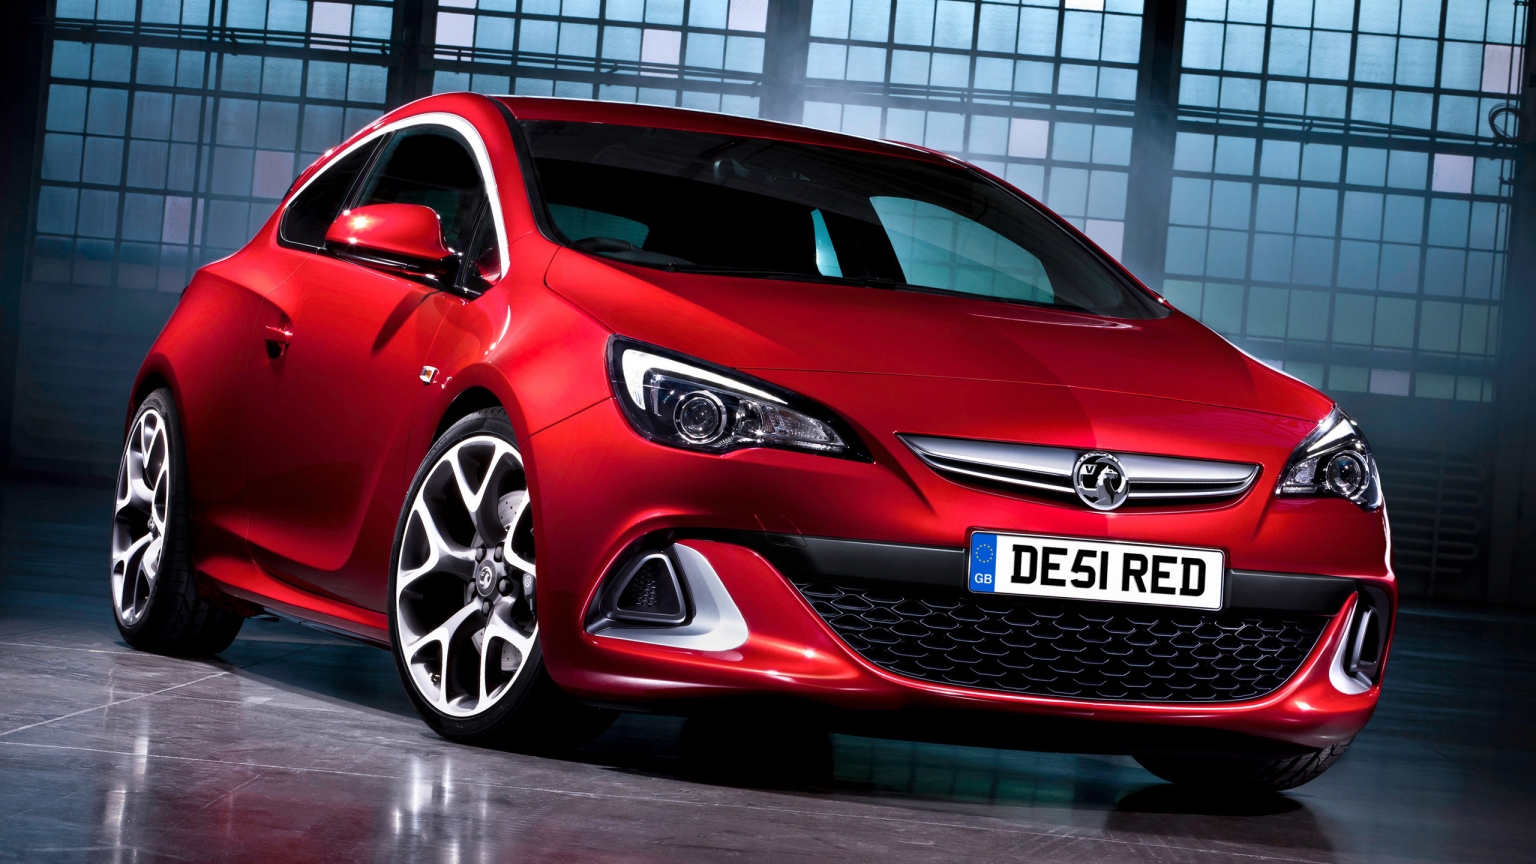 2012 Vauxhall Astra GTC for 1536 x 864 HDTV resolution